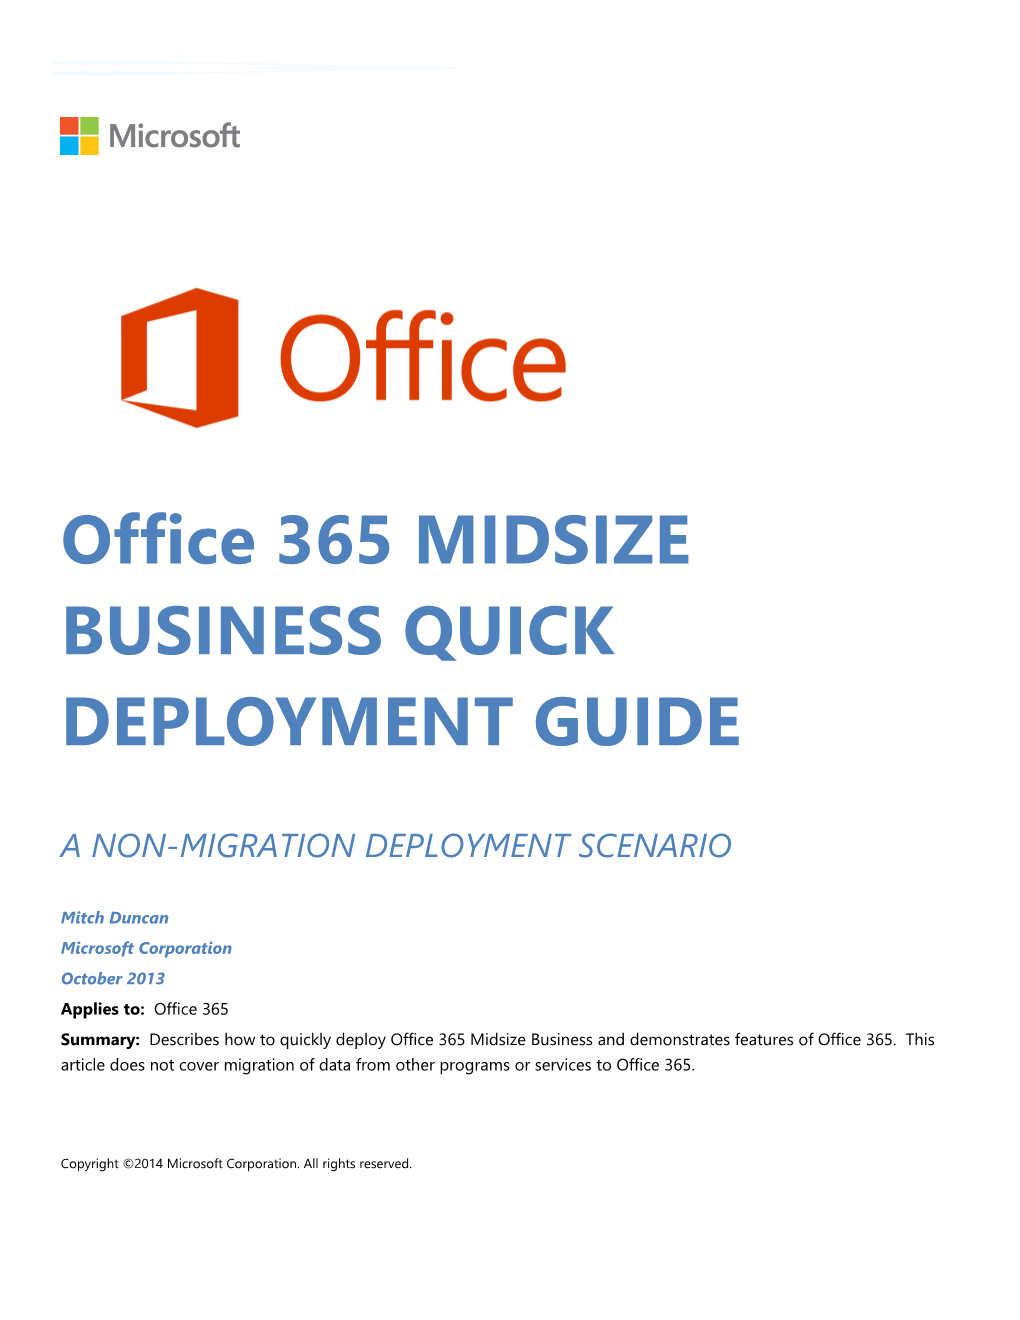 Office 365 MIDSIZE BUSINESS QUICK DEPLOYMENT Guideoctober 2013